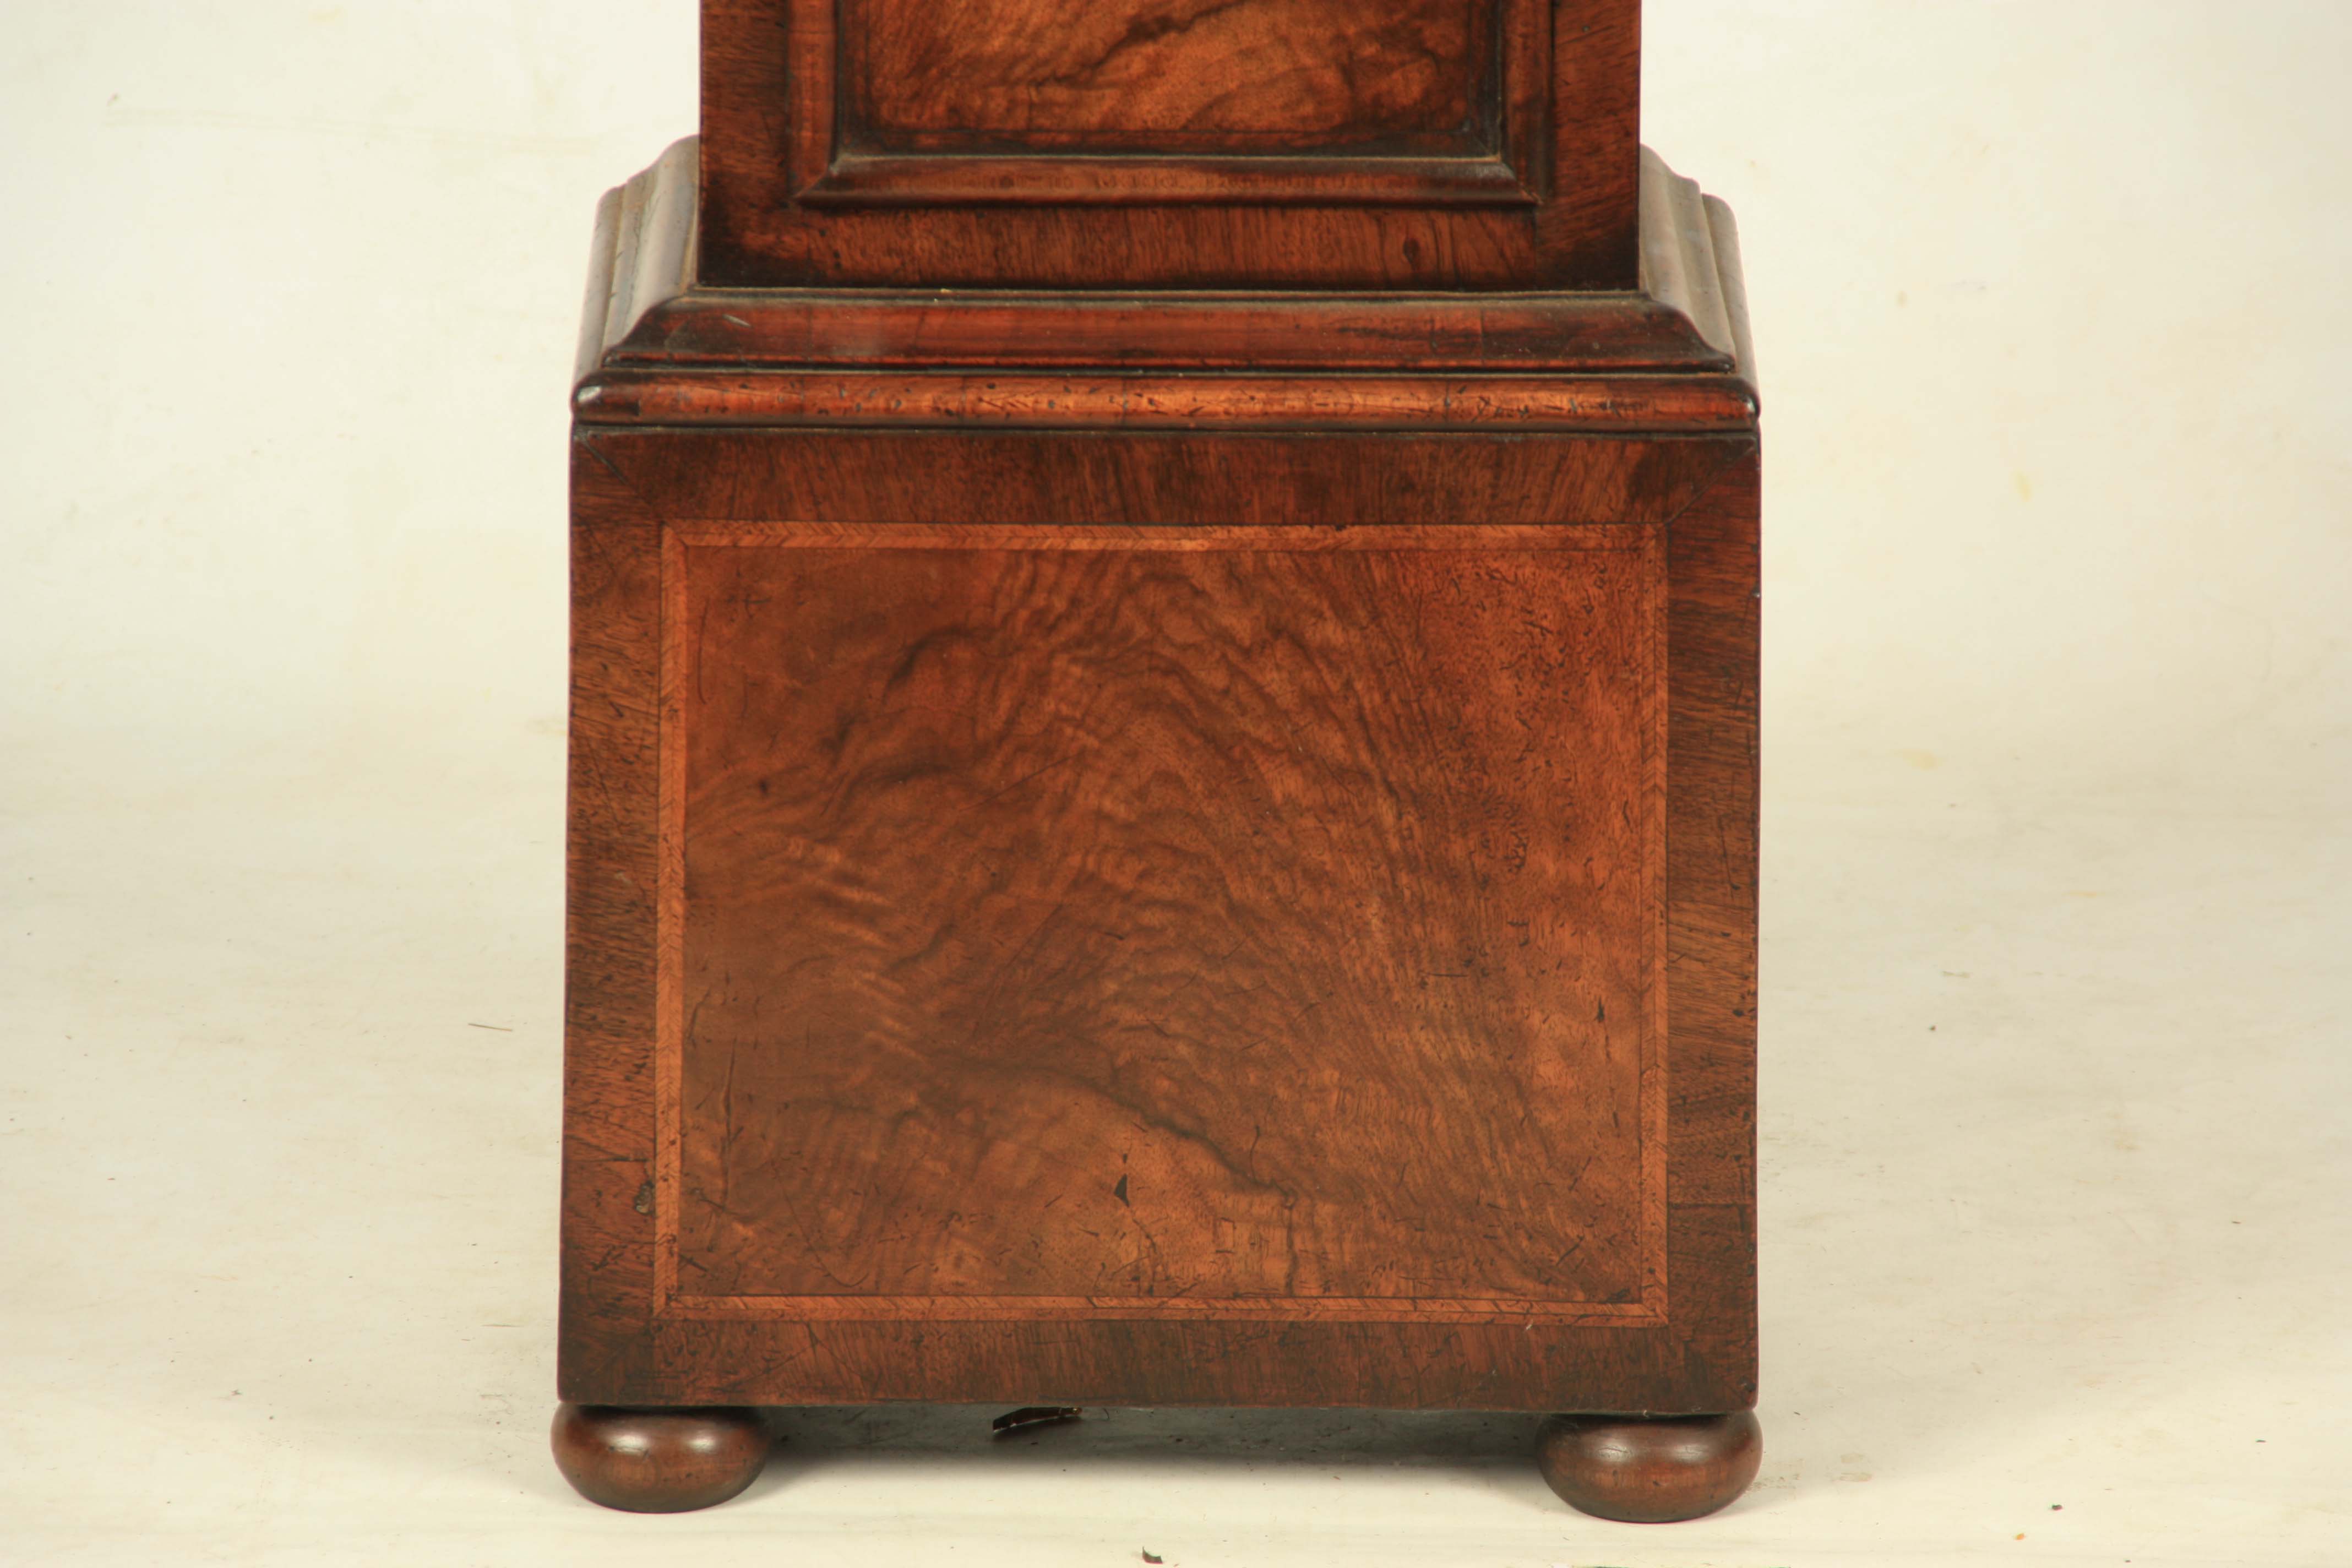 SAMUEL GASCOINE LONDON. AN EALRY 18TH CENTURY AND LATER 10” HERRING-BANDED FIGURED WALNUT EIGHT- - Image 3 of 9